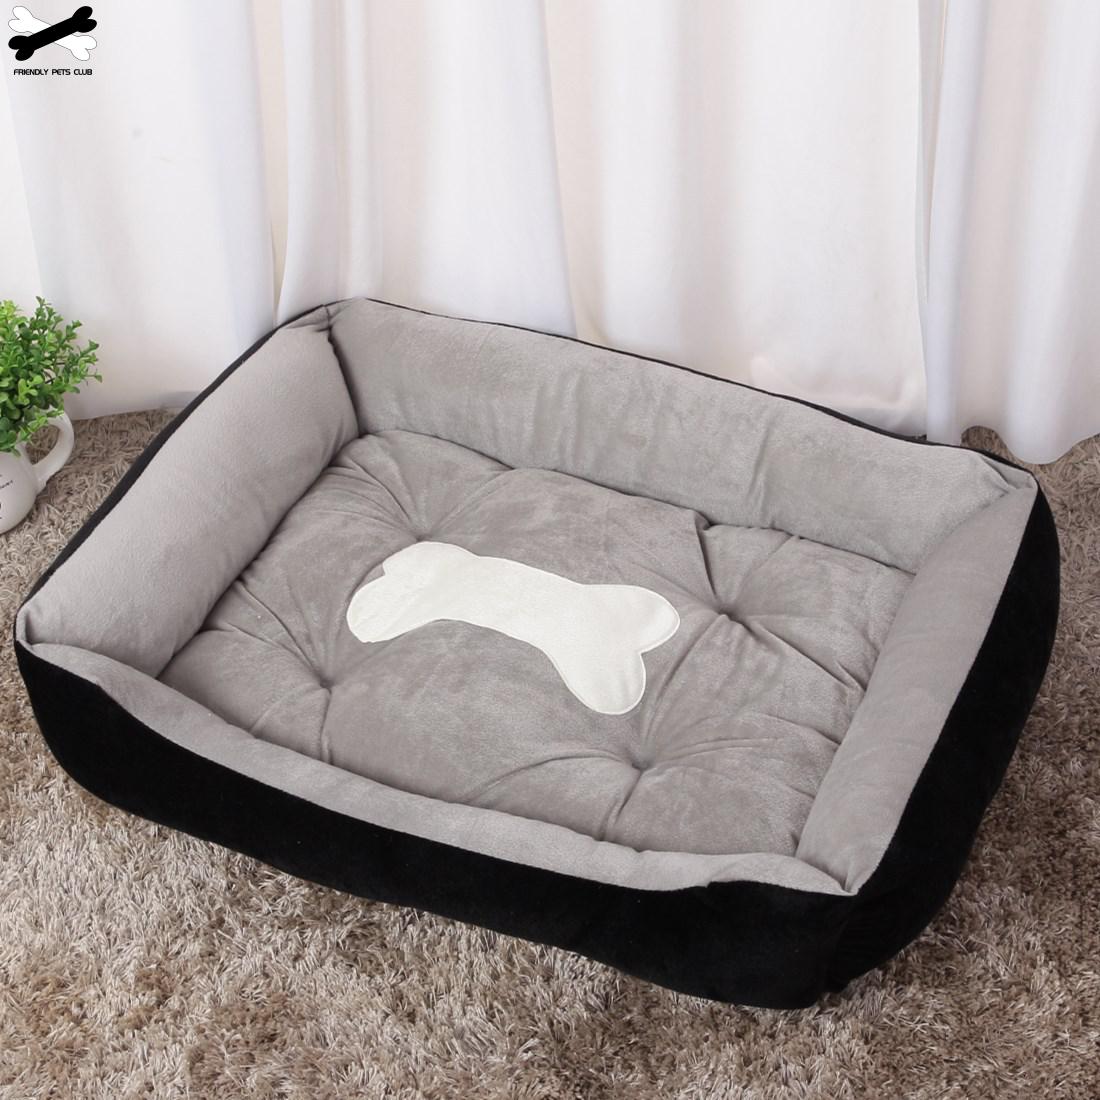 Bone Pet Bed Warm Pet Products For Small Medium Large Dog Soft Pet Bed For Dogs Washable House For Cat Puppy Cotton Kennel Mat